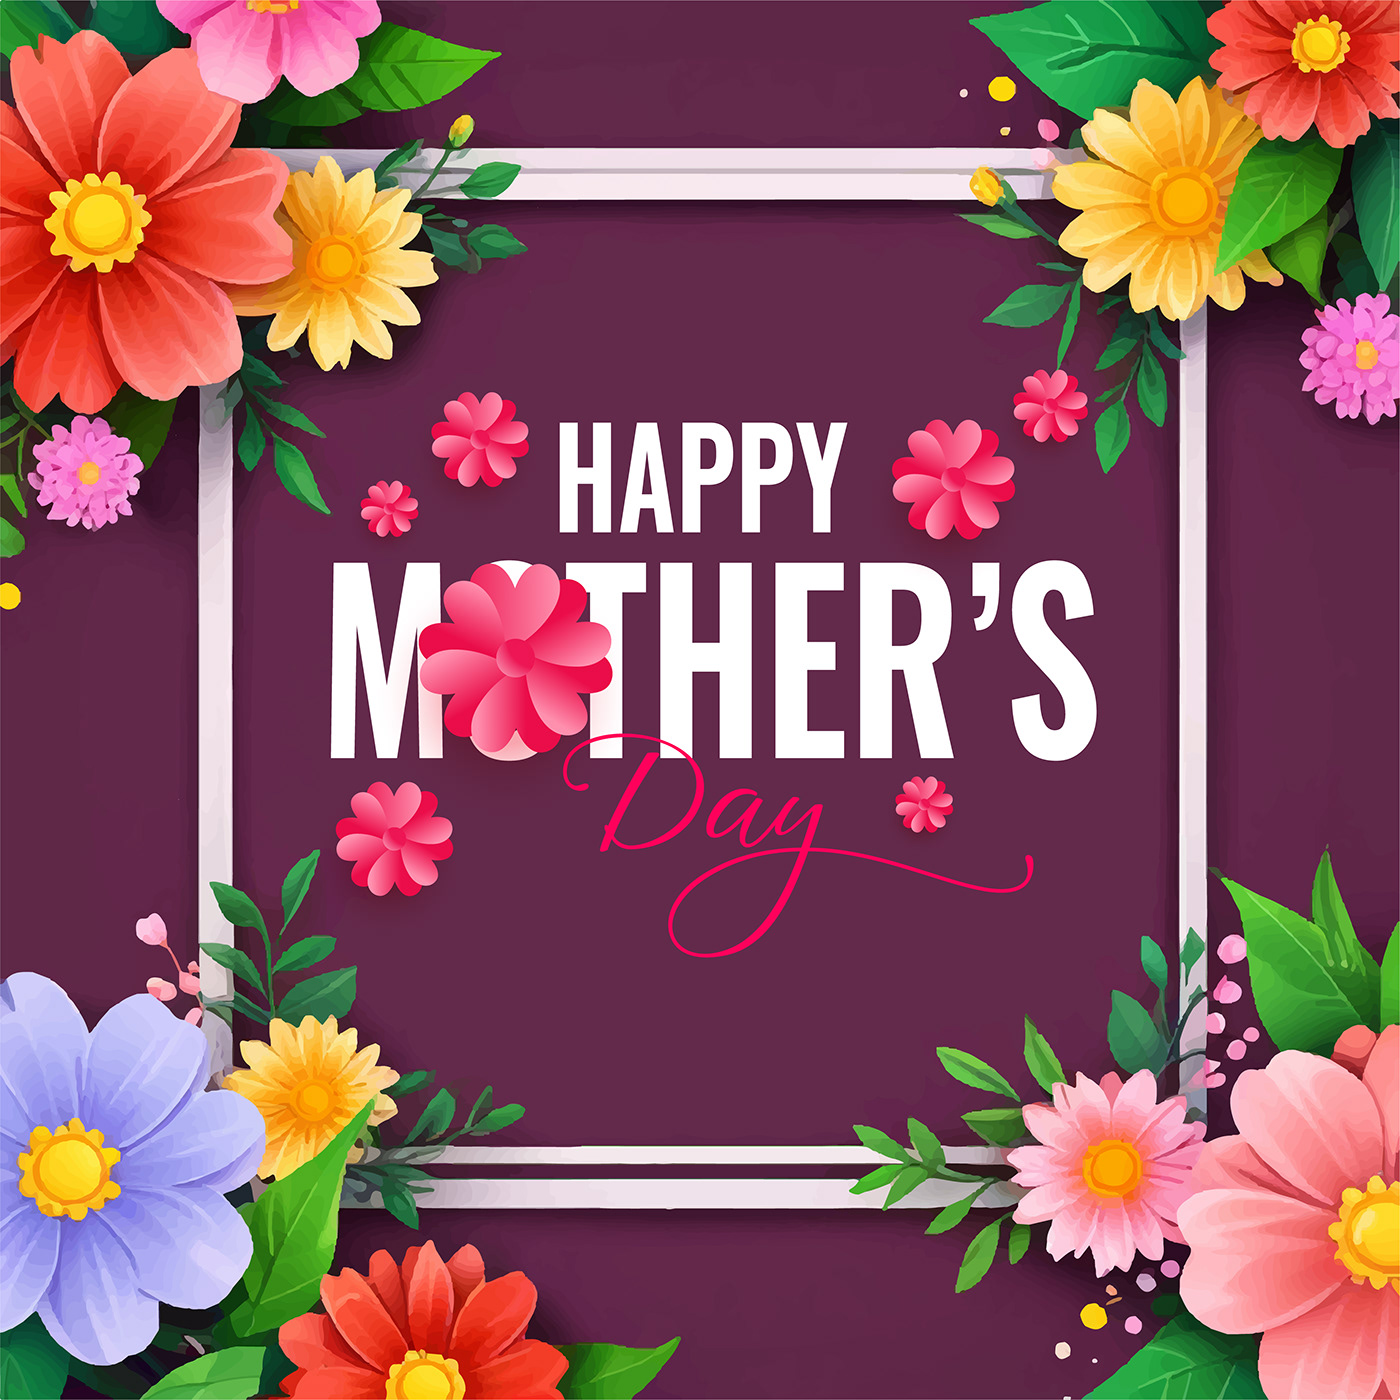 mother happy Holiday Birthday DAUGHTER Mum mom template Mother's Day Love